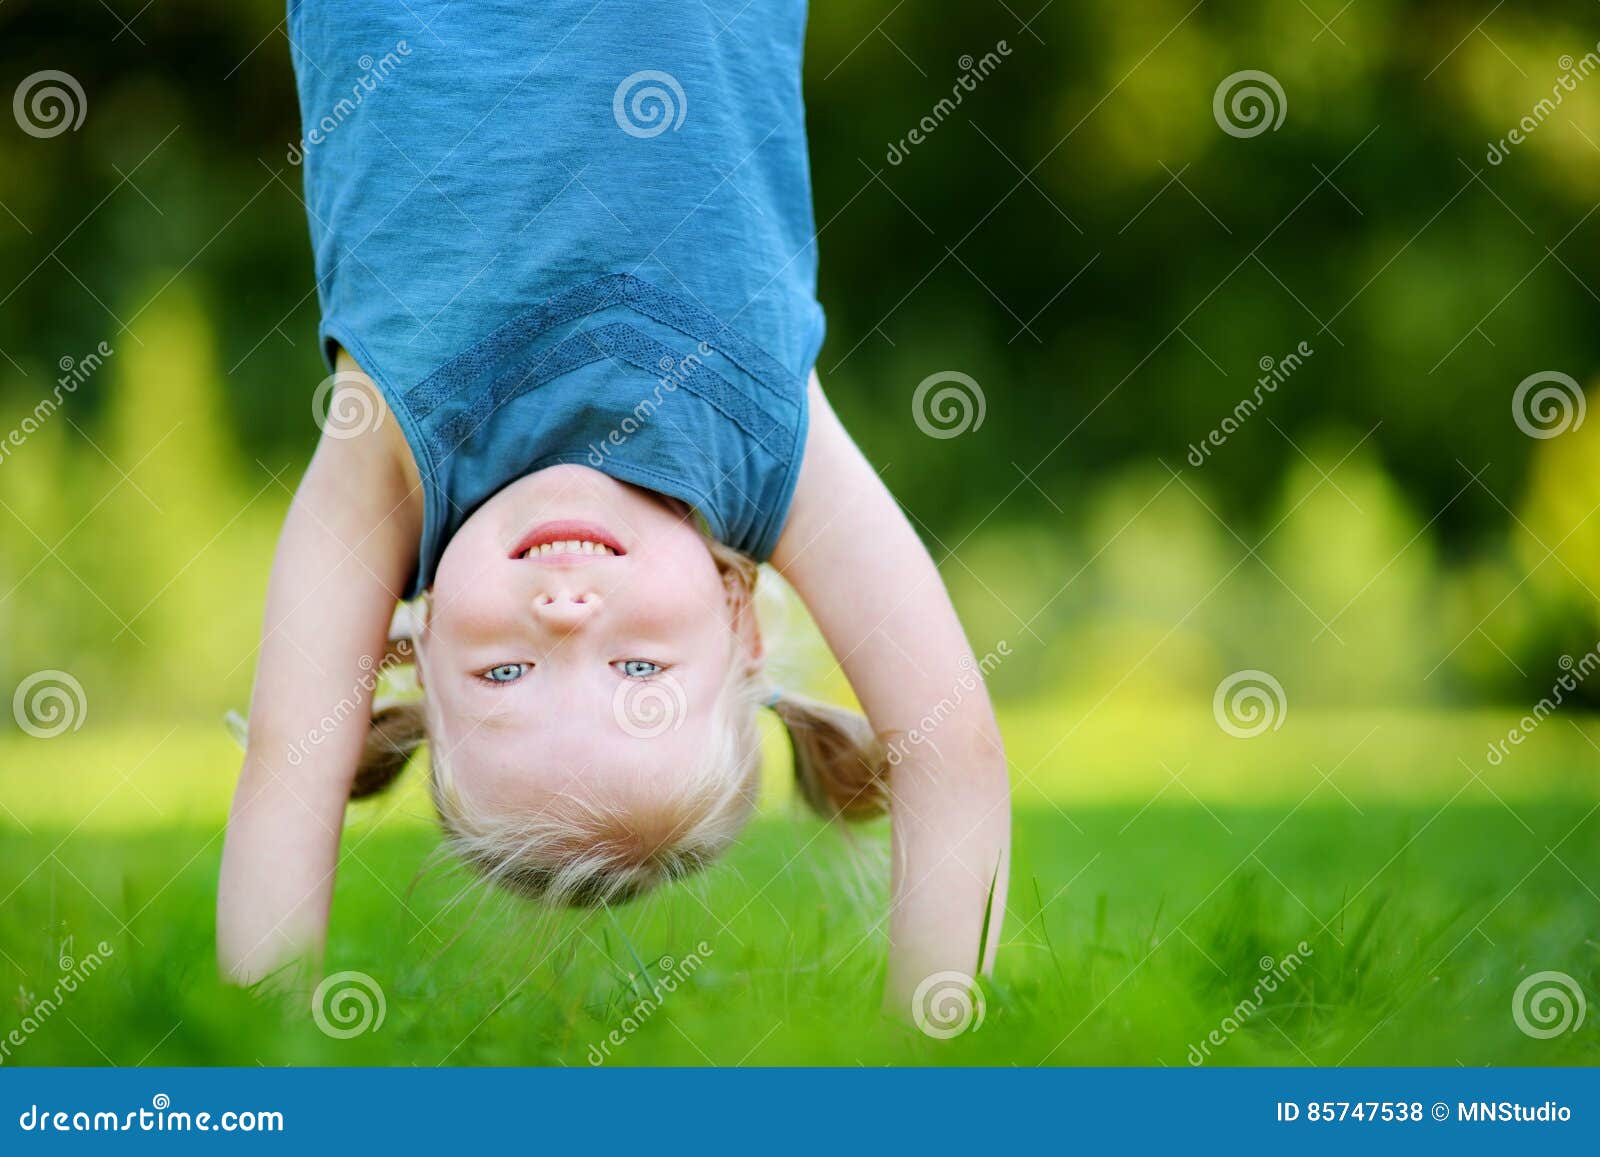 Happy Young Child Playing Head Over Heels on a Grass in Spring Park ...